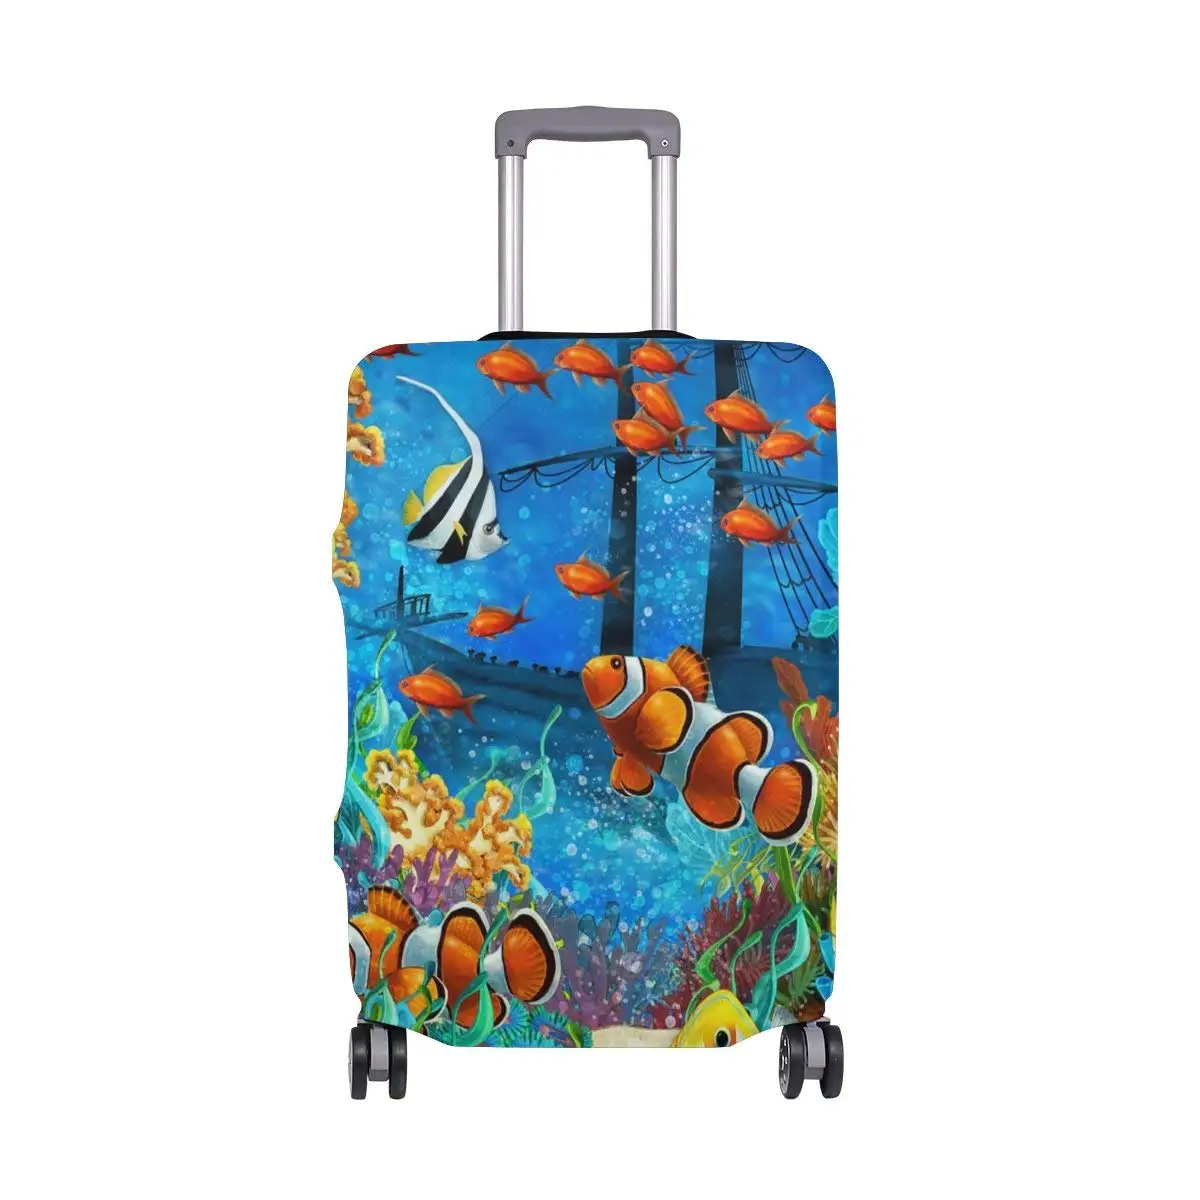 Cheap Fish Suitcase, find Fish Suitcase deals on line at Alibaba.com